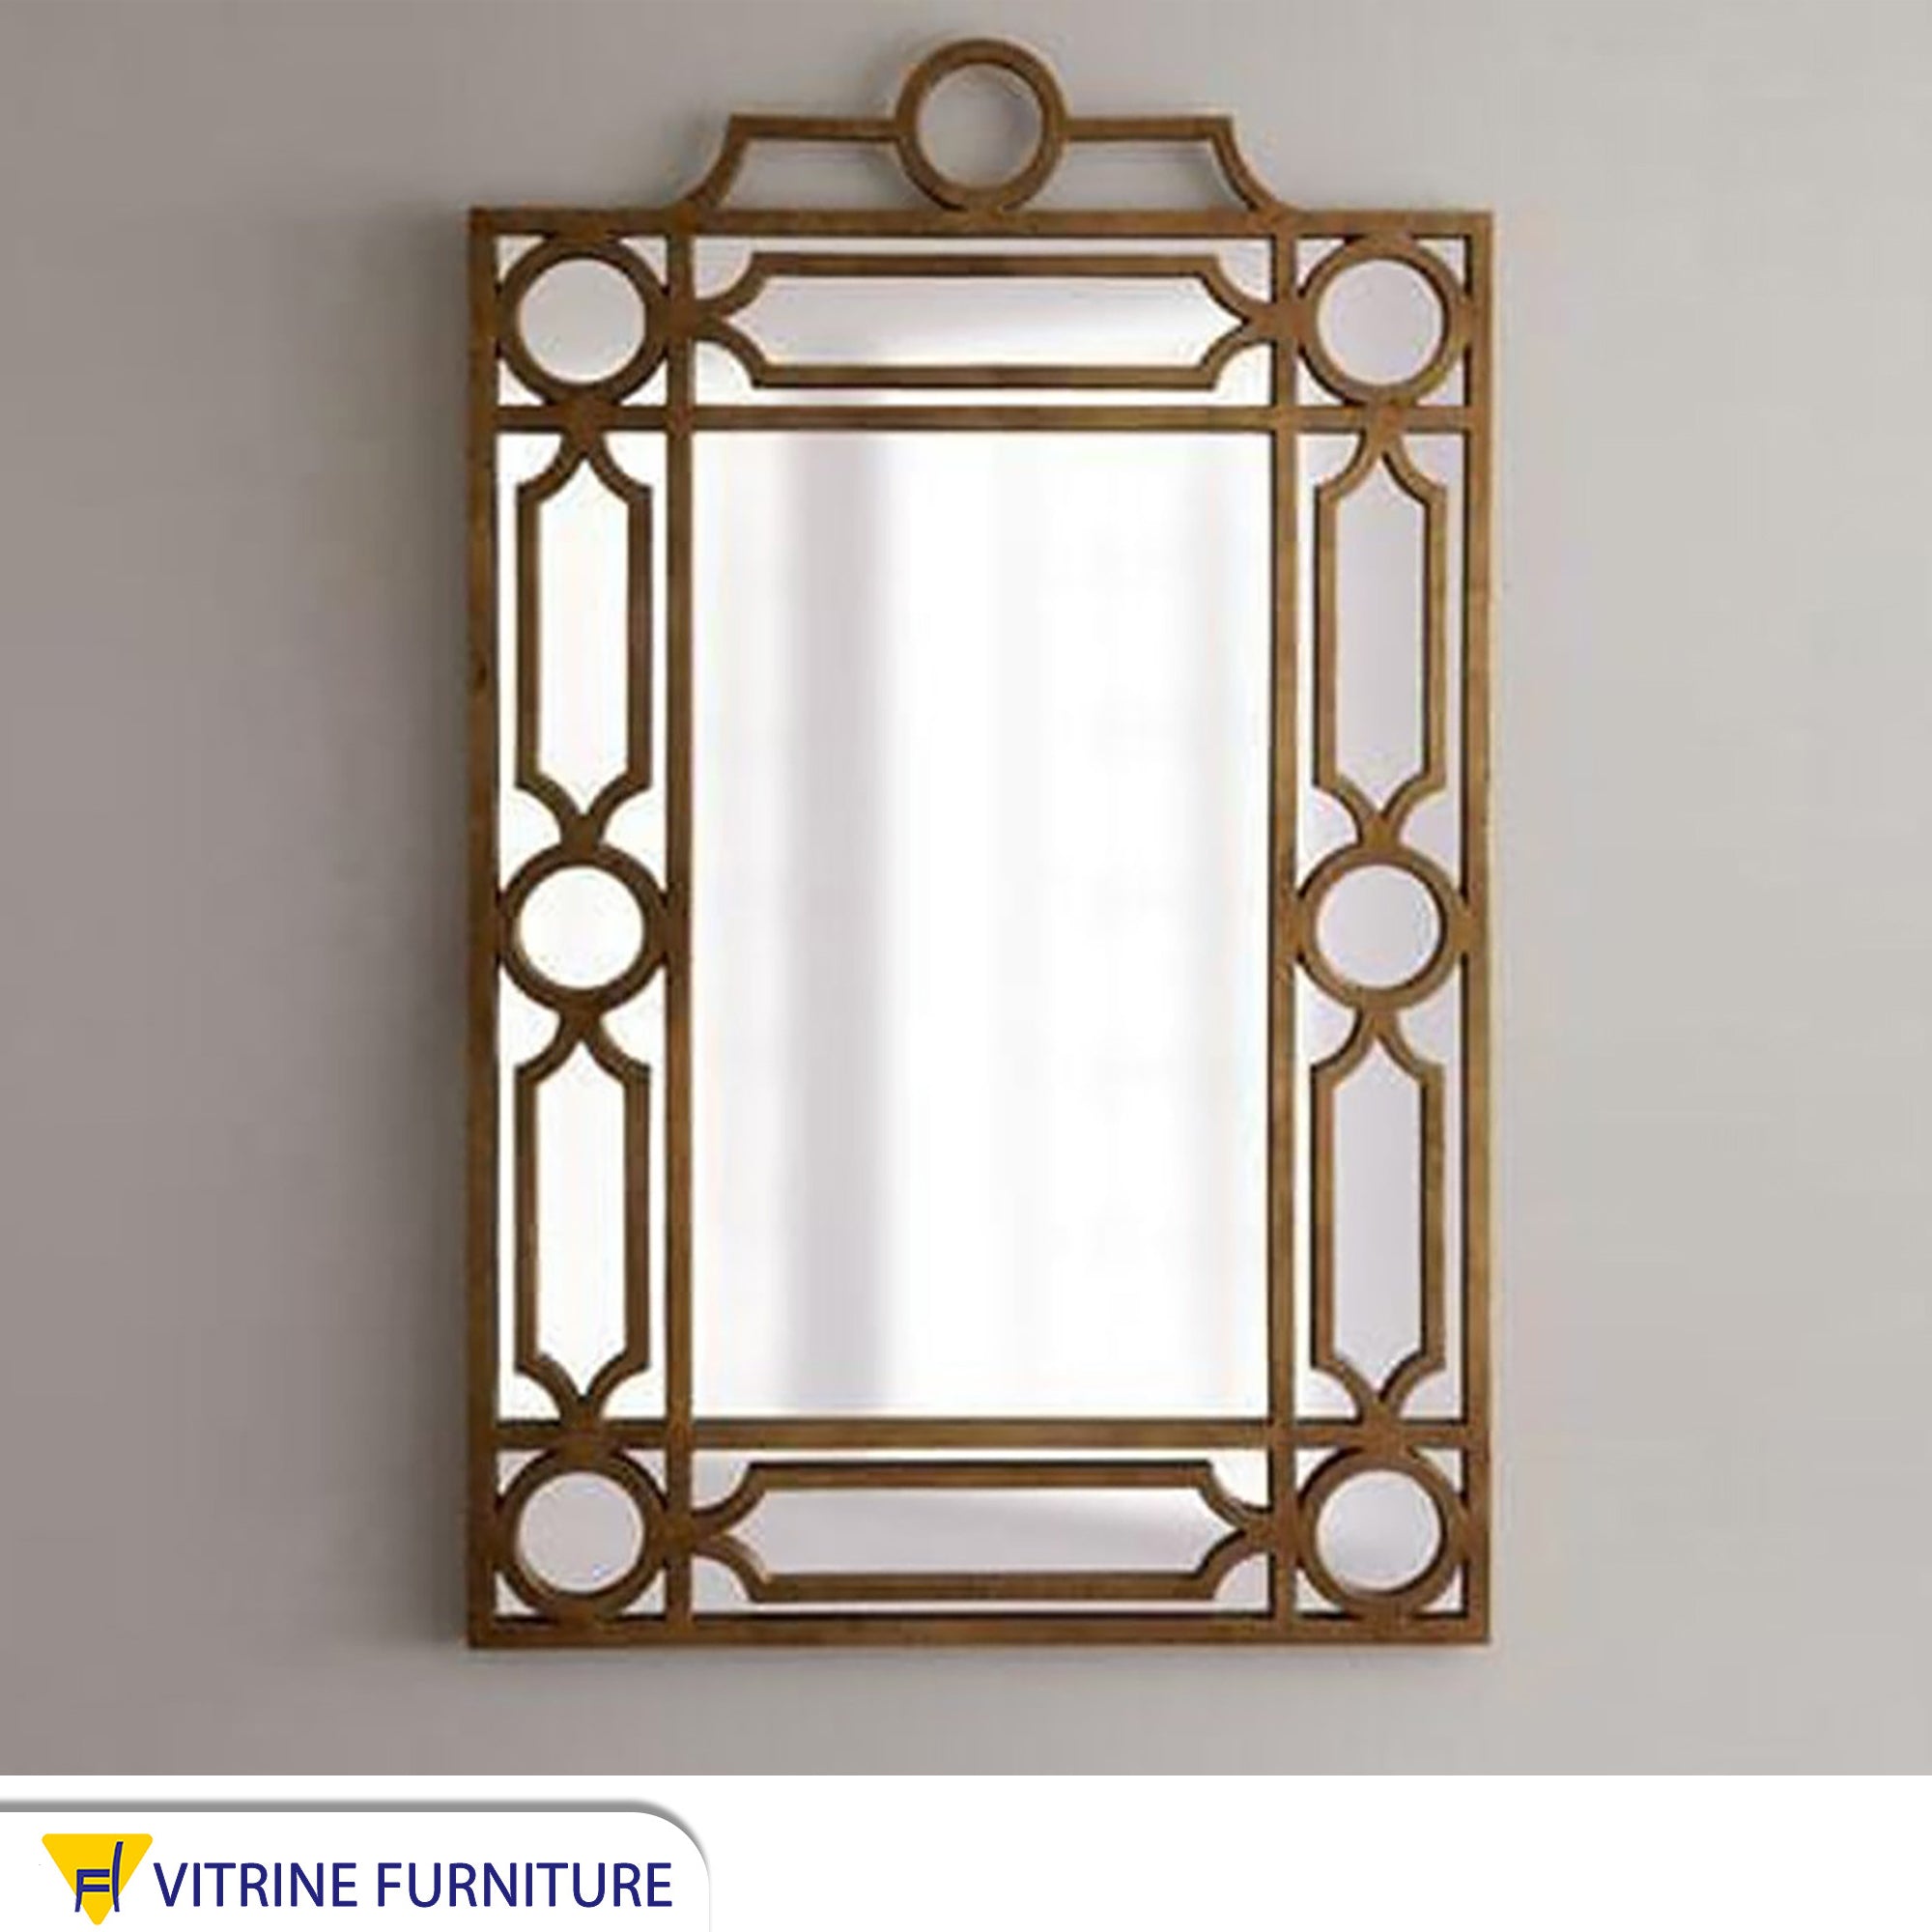 A rectangular mirror with a frame decorated with hollow circles